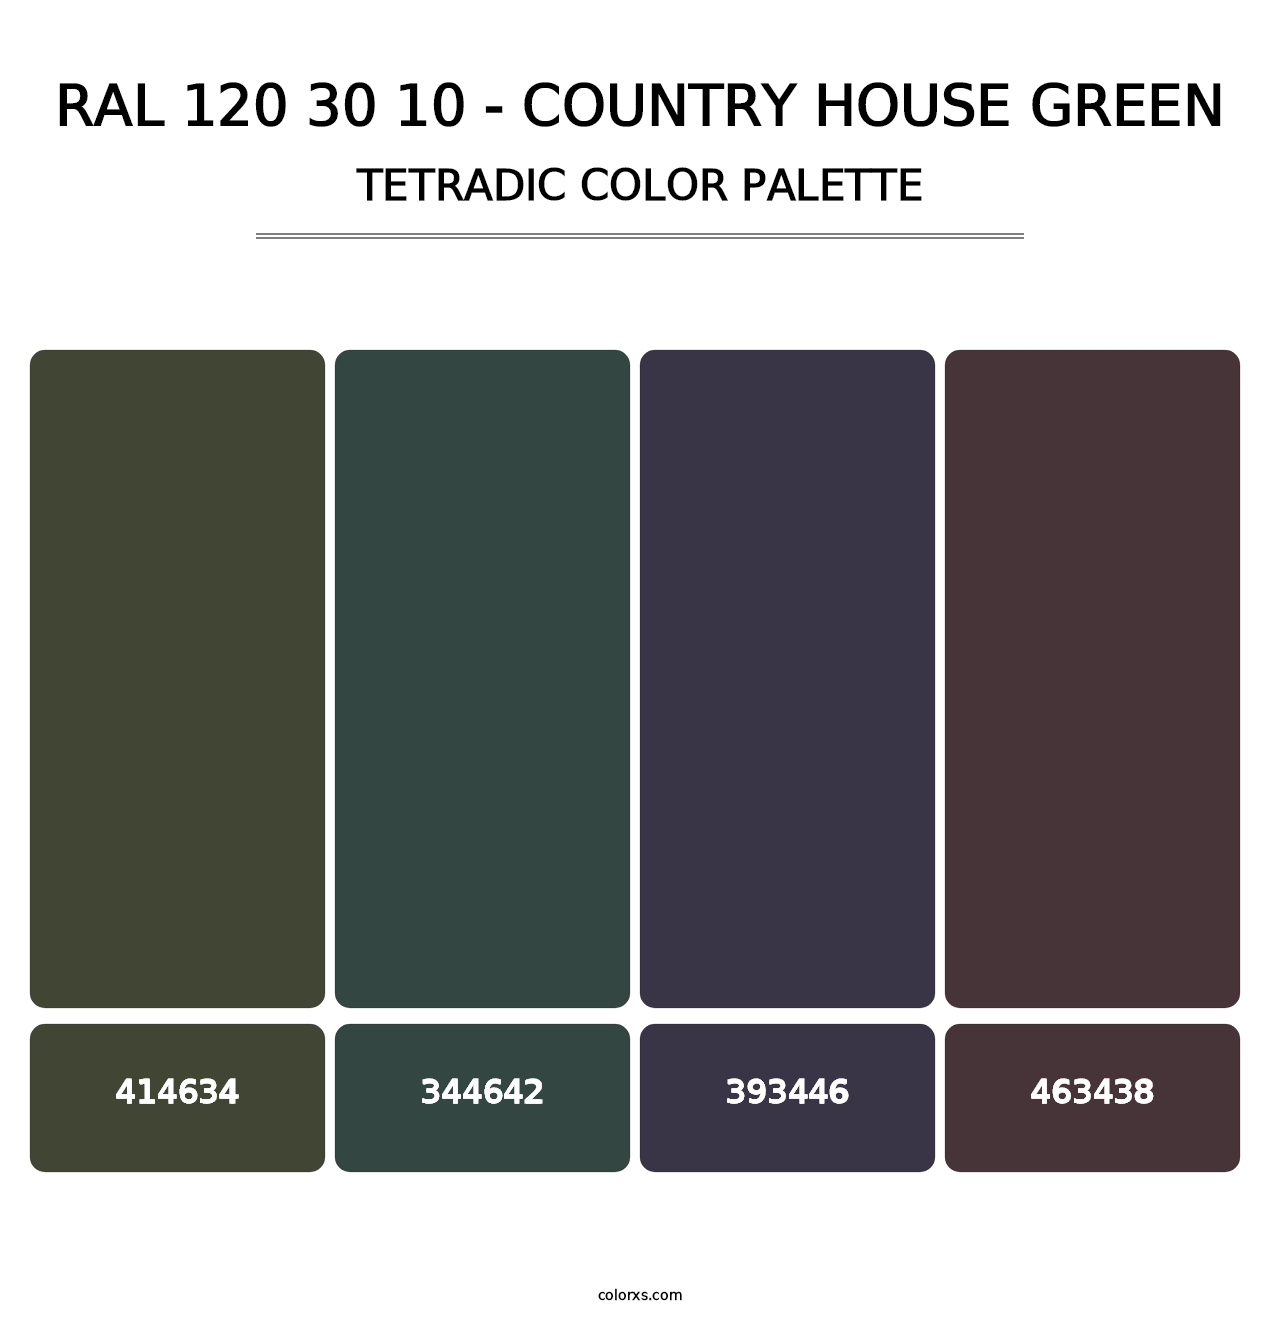 RAL 120 30 10 - Country House Green - Tetradic Color Palette